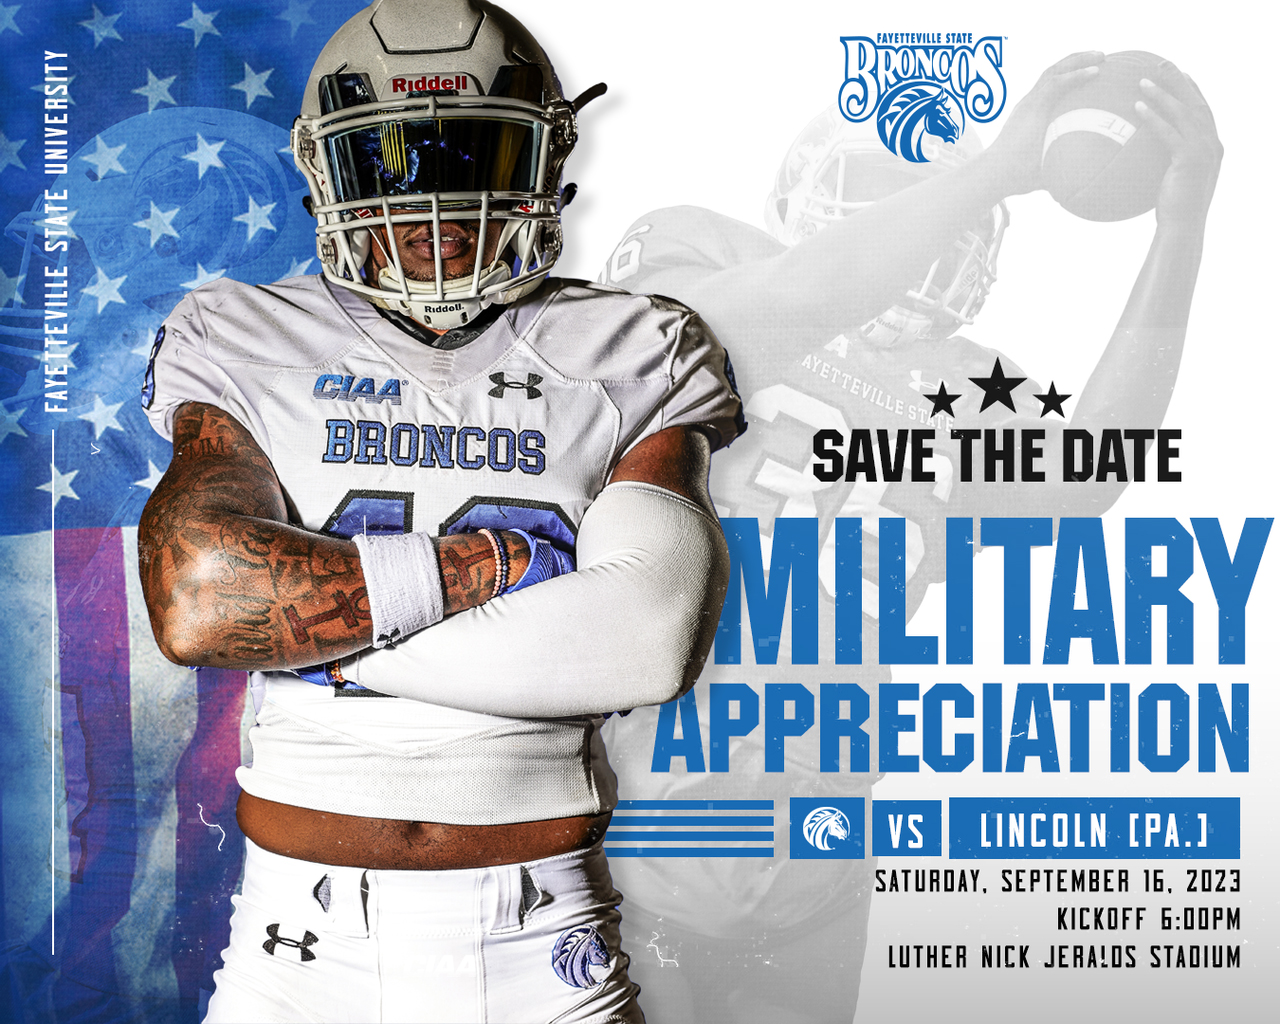 Fayetteville State Broncos vs Lincoln (PA) Lions Military Appreciation Football Game Flyer